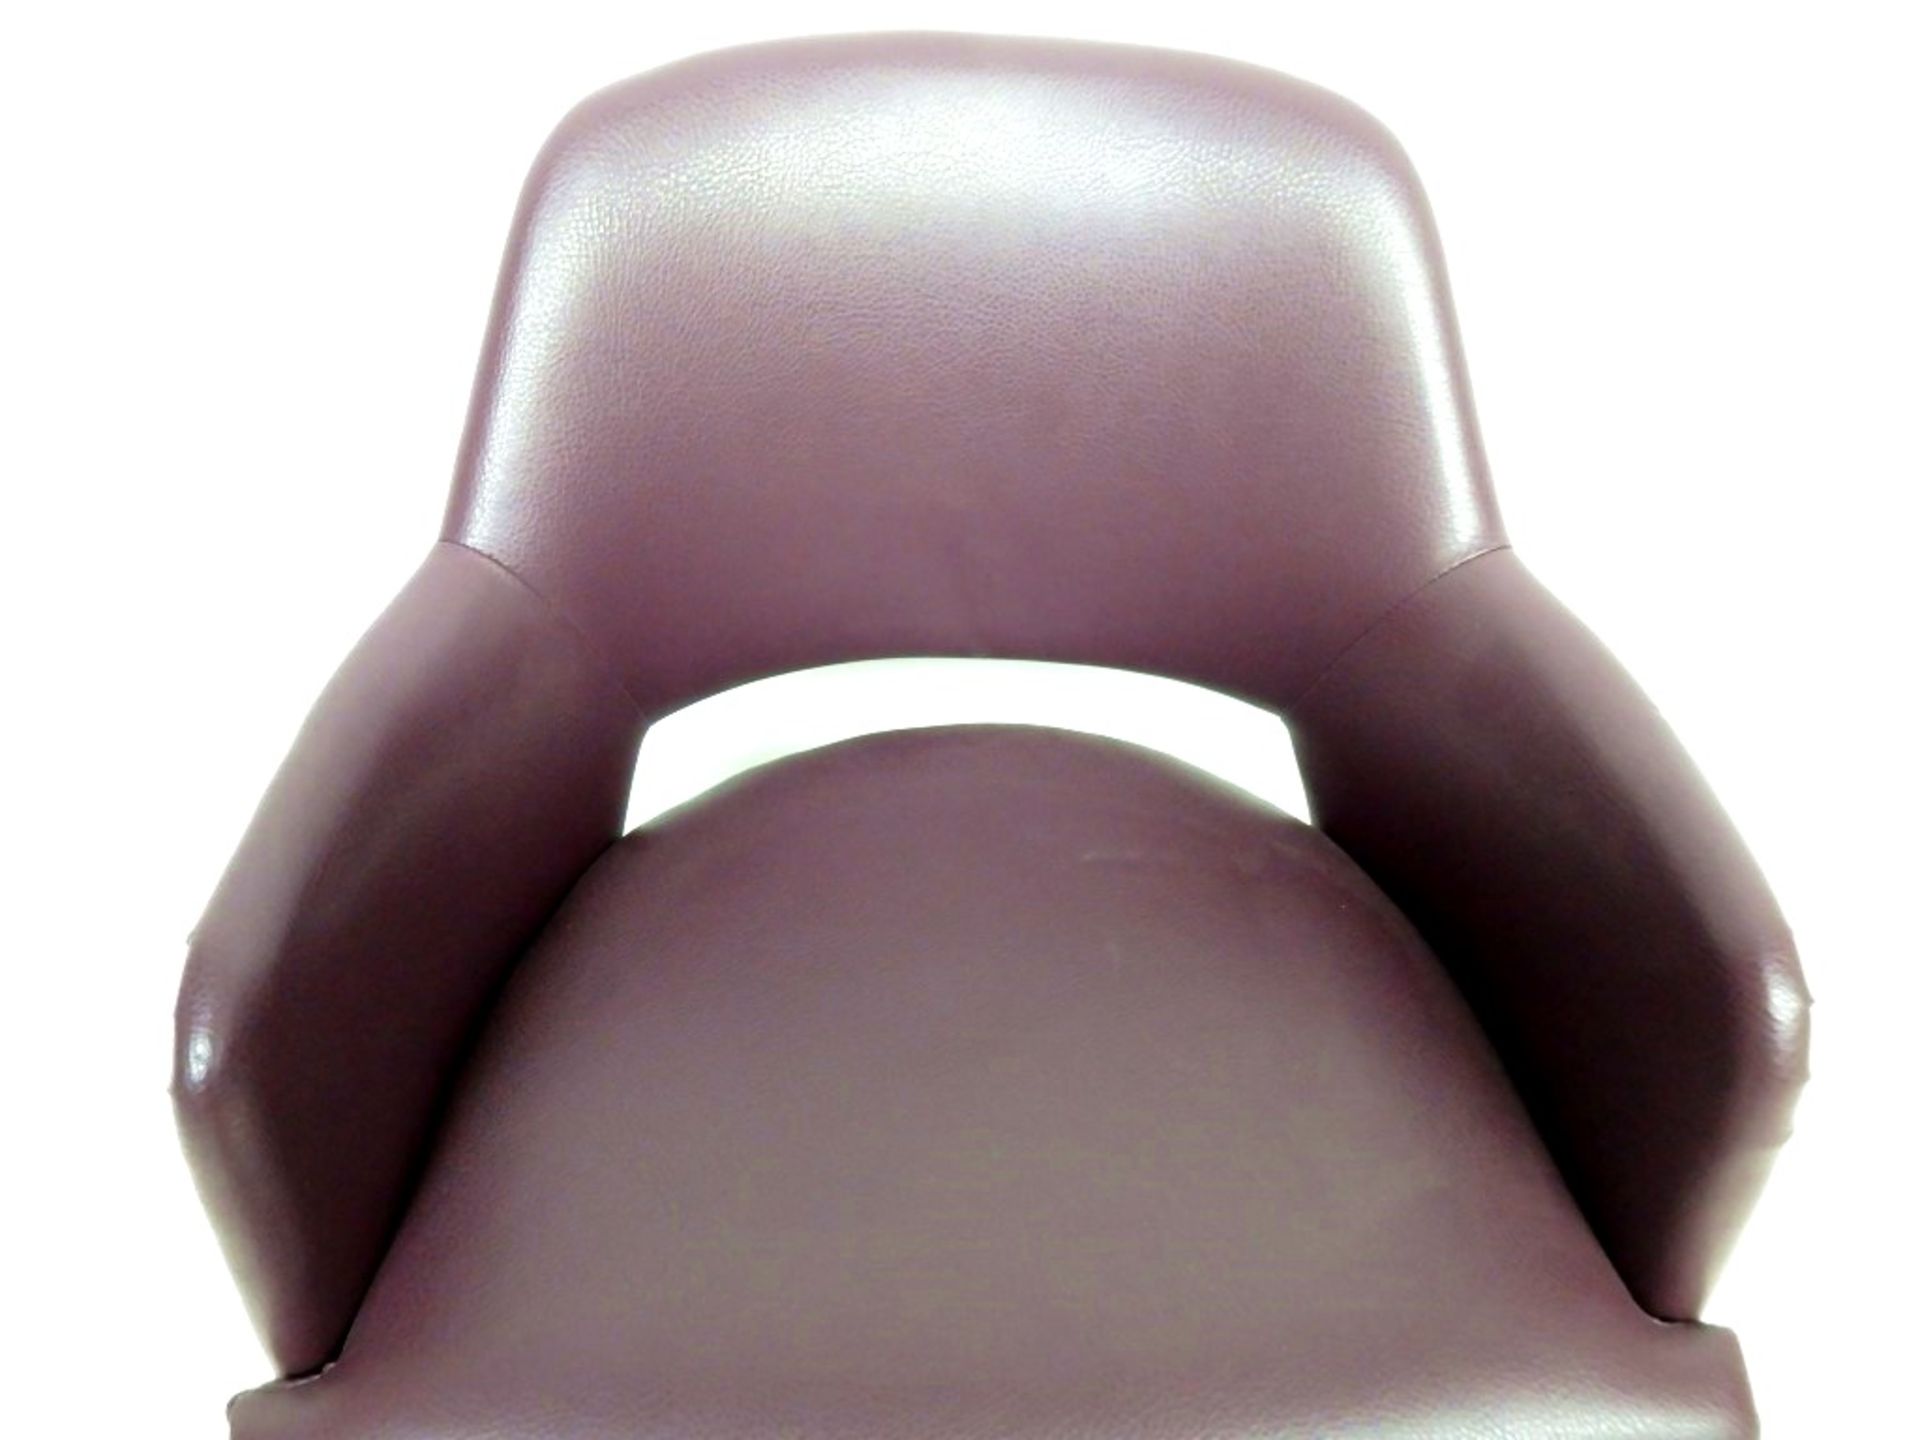 1 x Low Profile Swivel Chair Upholstered In A Rich Plum Leather - Dimensions: W60 x D50 x H62cm - Re - Image 2 of 4